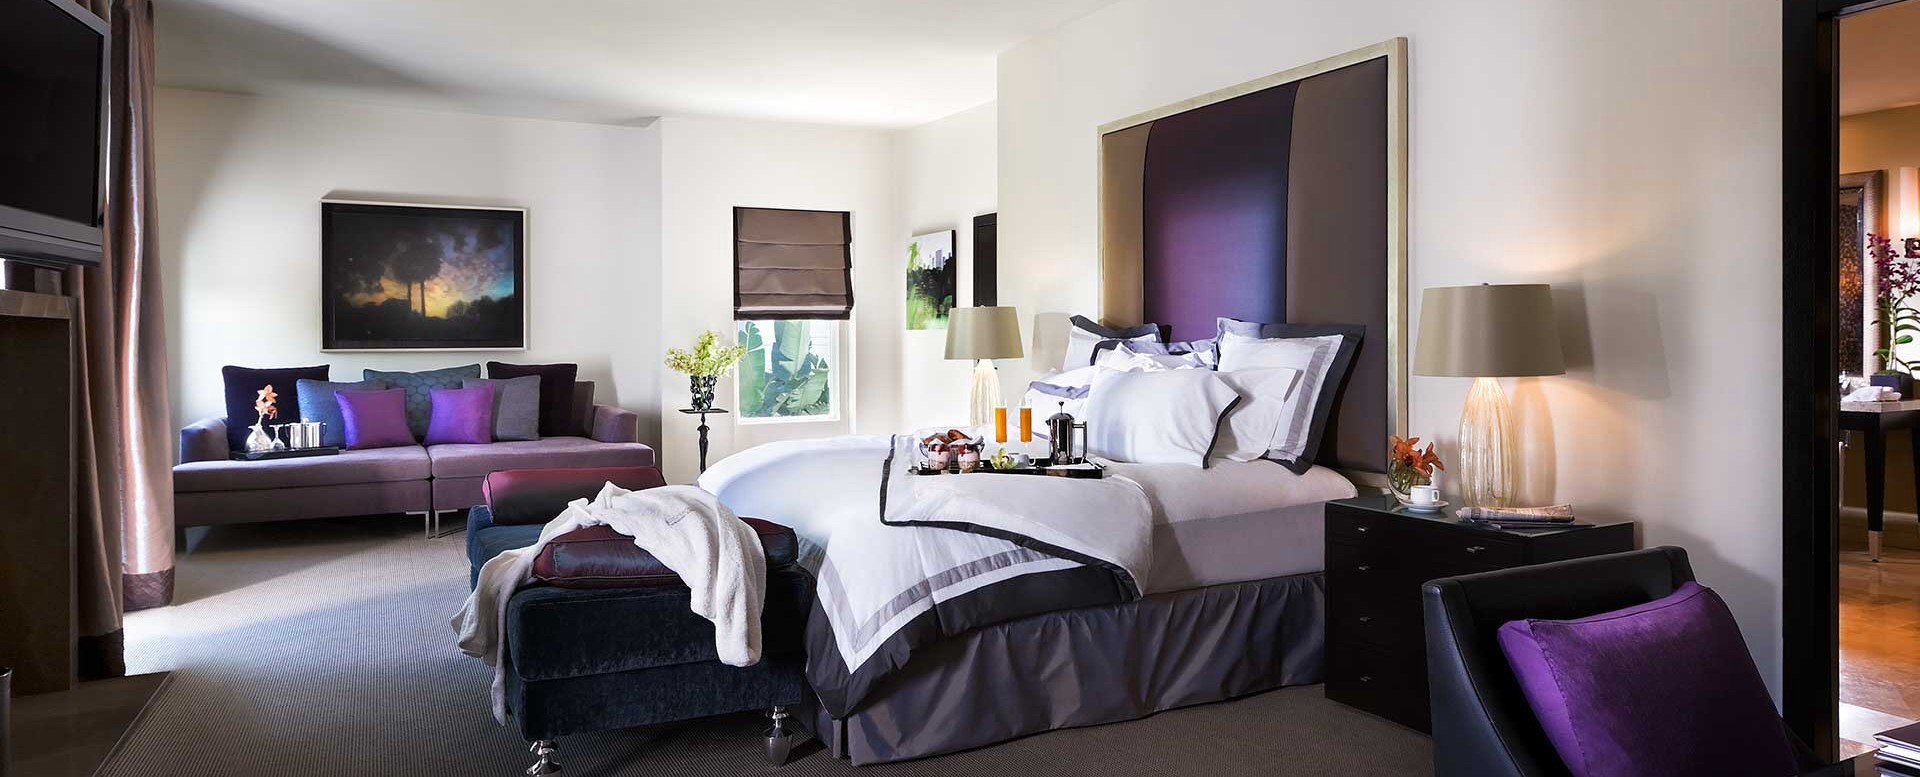 Sunset Marquis Hotel - President Suite master bedroom